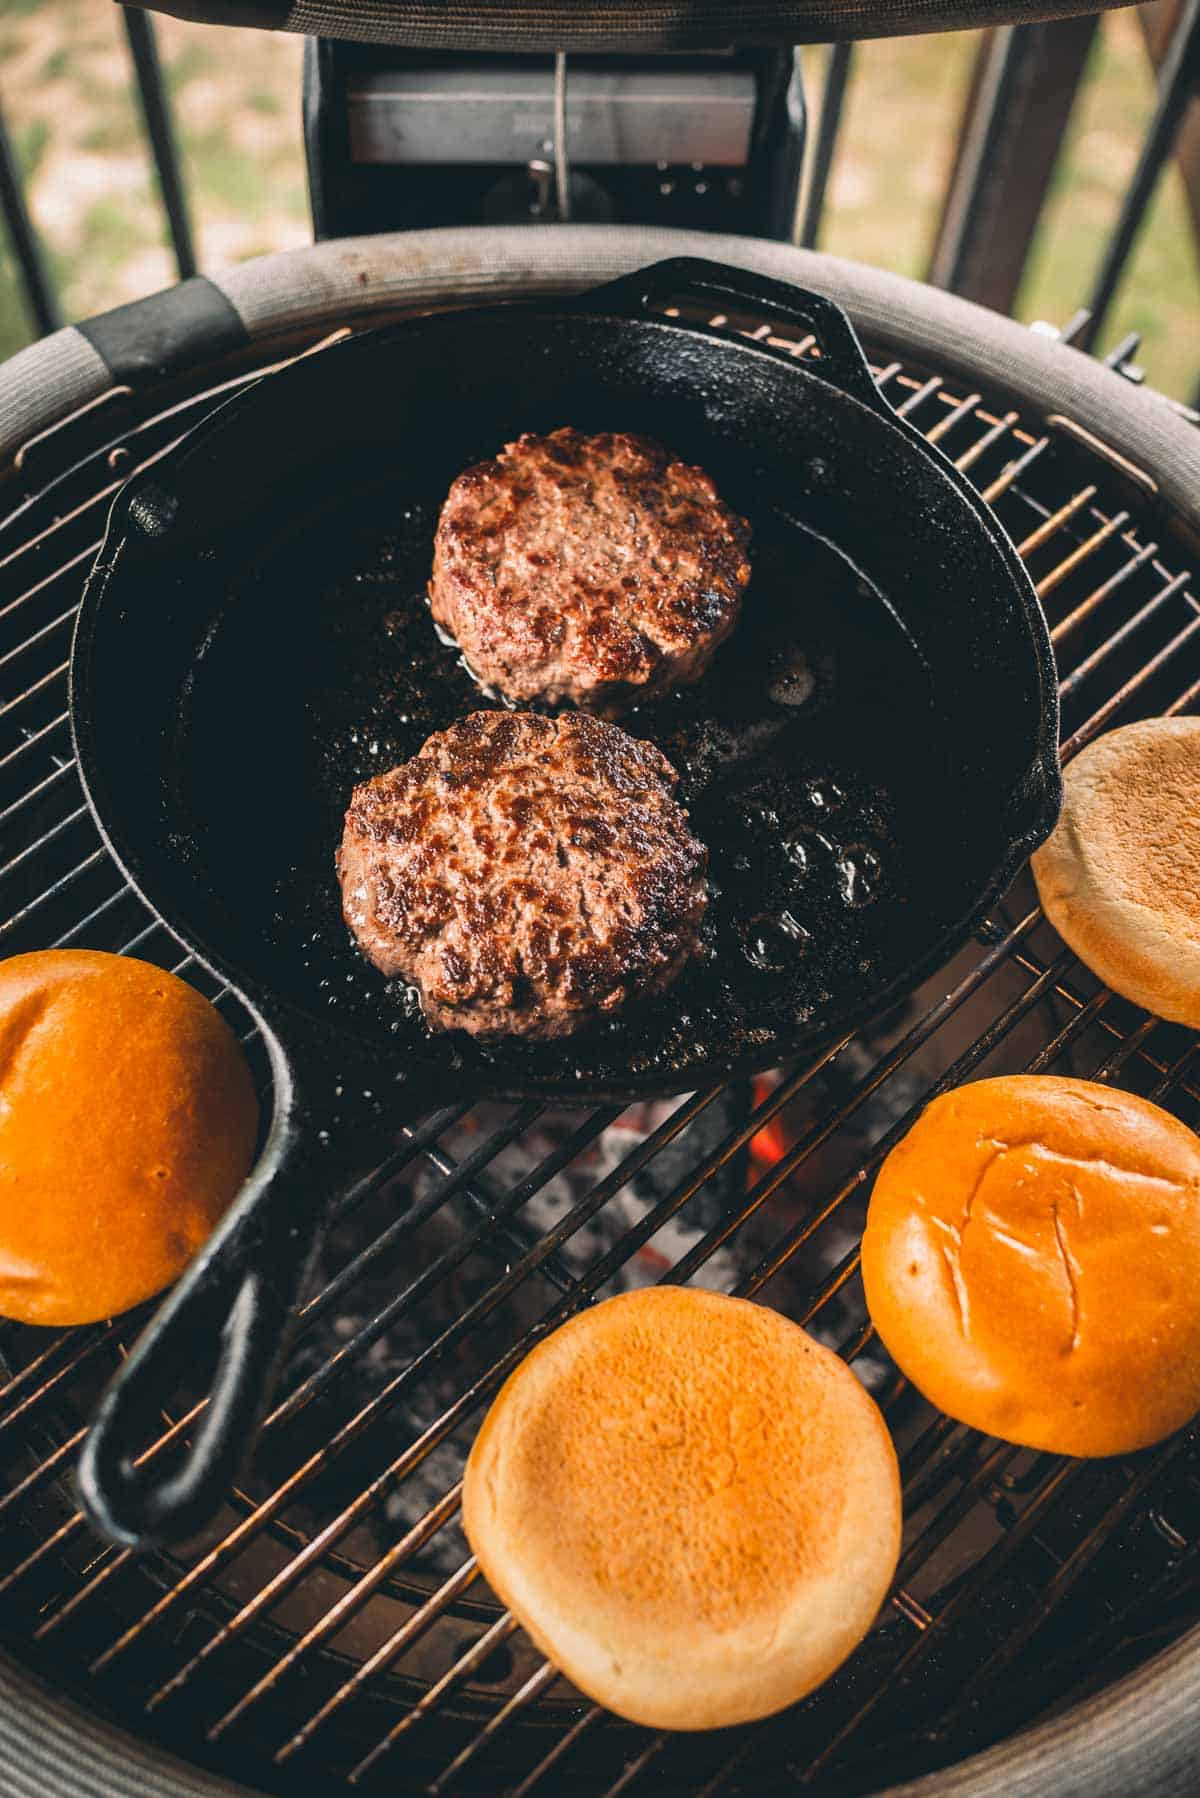 Two burger patties cooking in a cast iron skillet on a grill, with four hamburger buns toasting nearby on the grill grates.